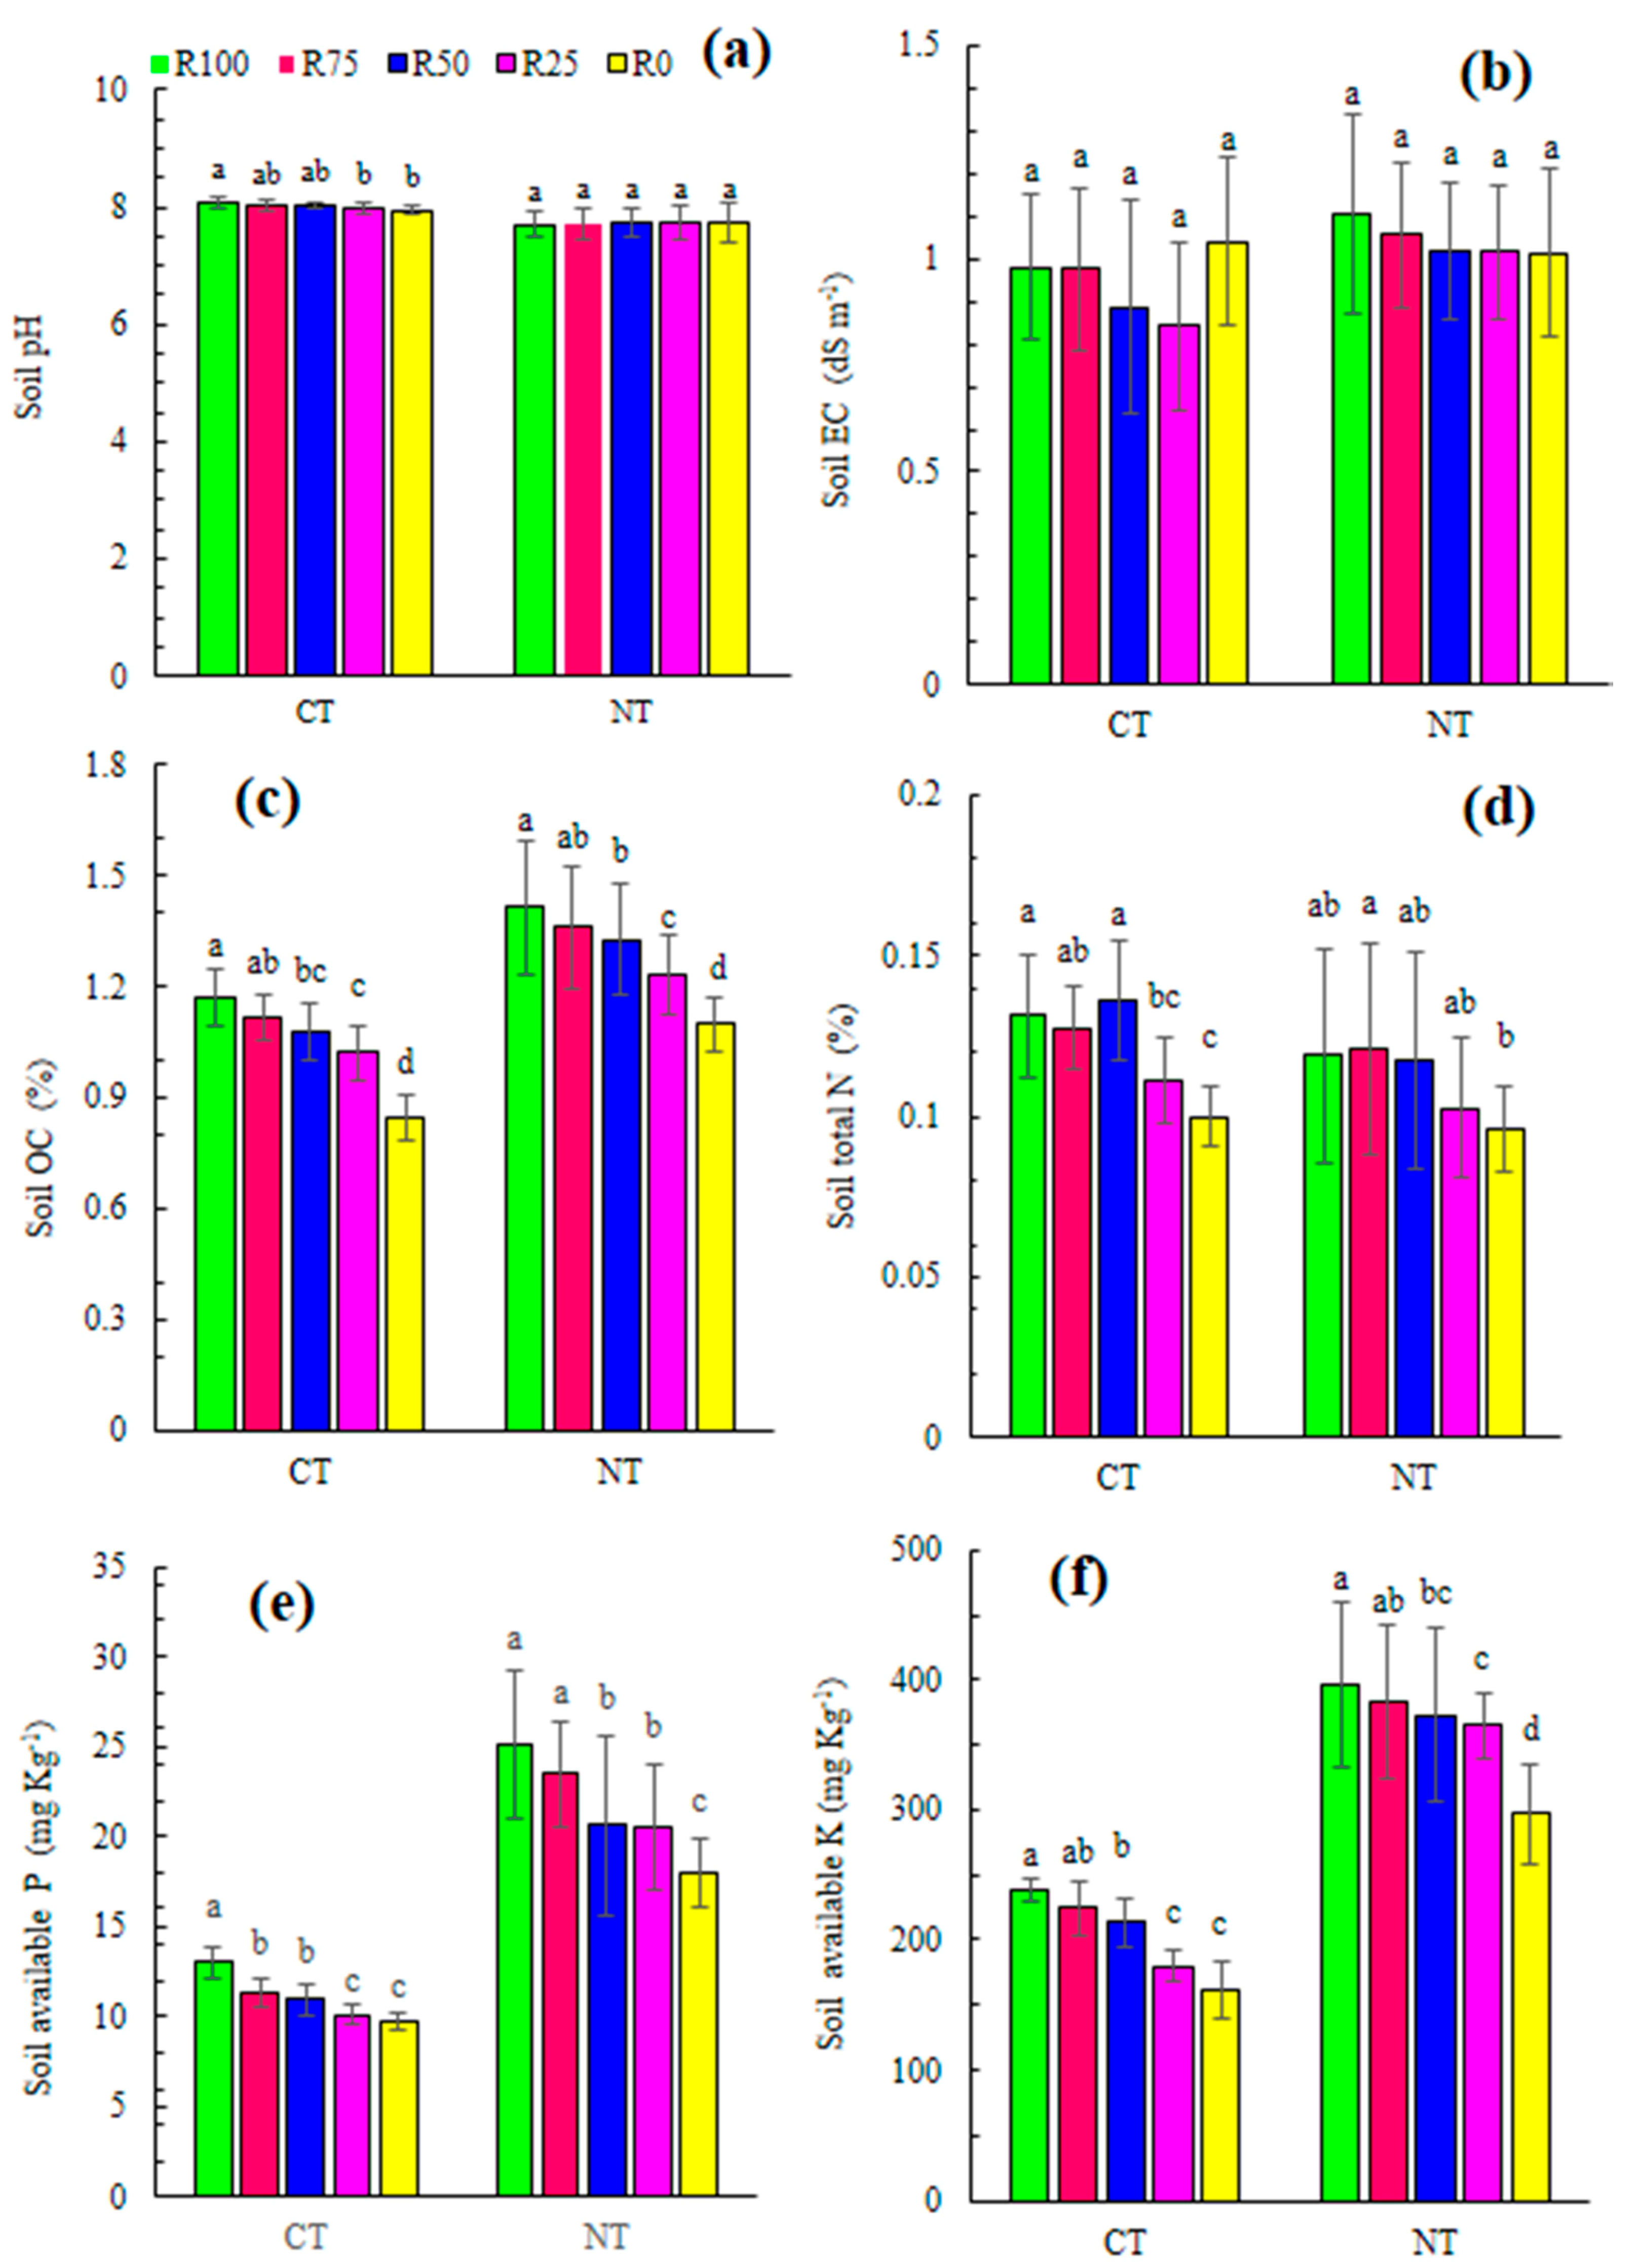 Agronomy Free Full Text Preliminary Effects Of Crop Residue Management On Soil Quality And Crop Production Under Different Soil Management Regimes In Corn Wheat Rotation Systems Html